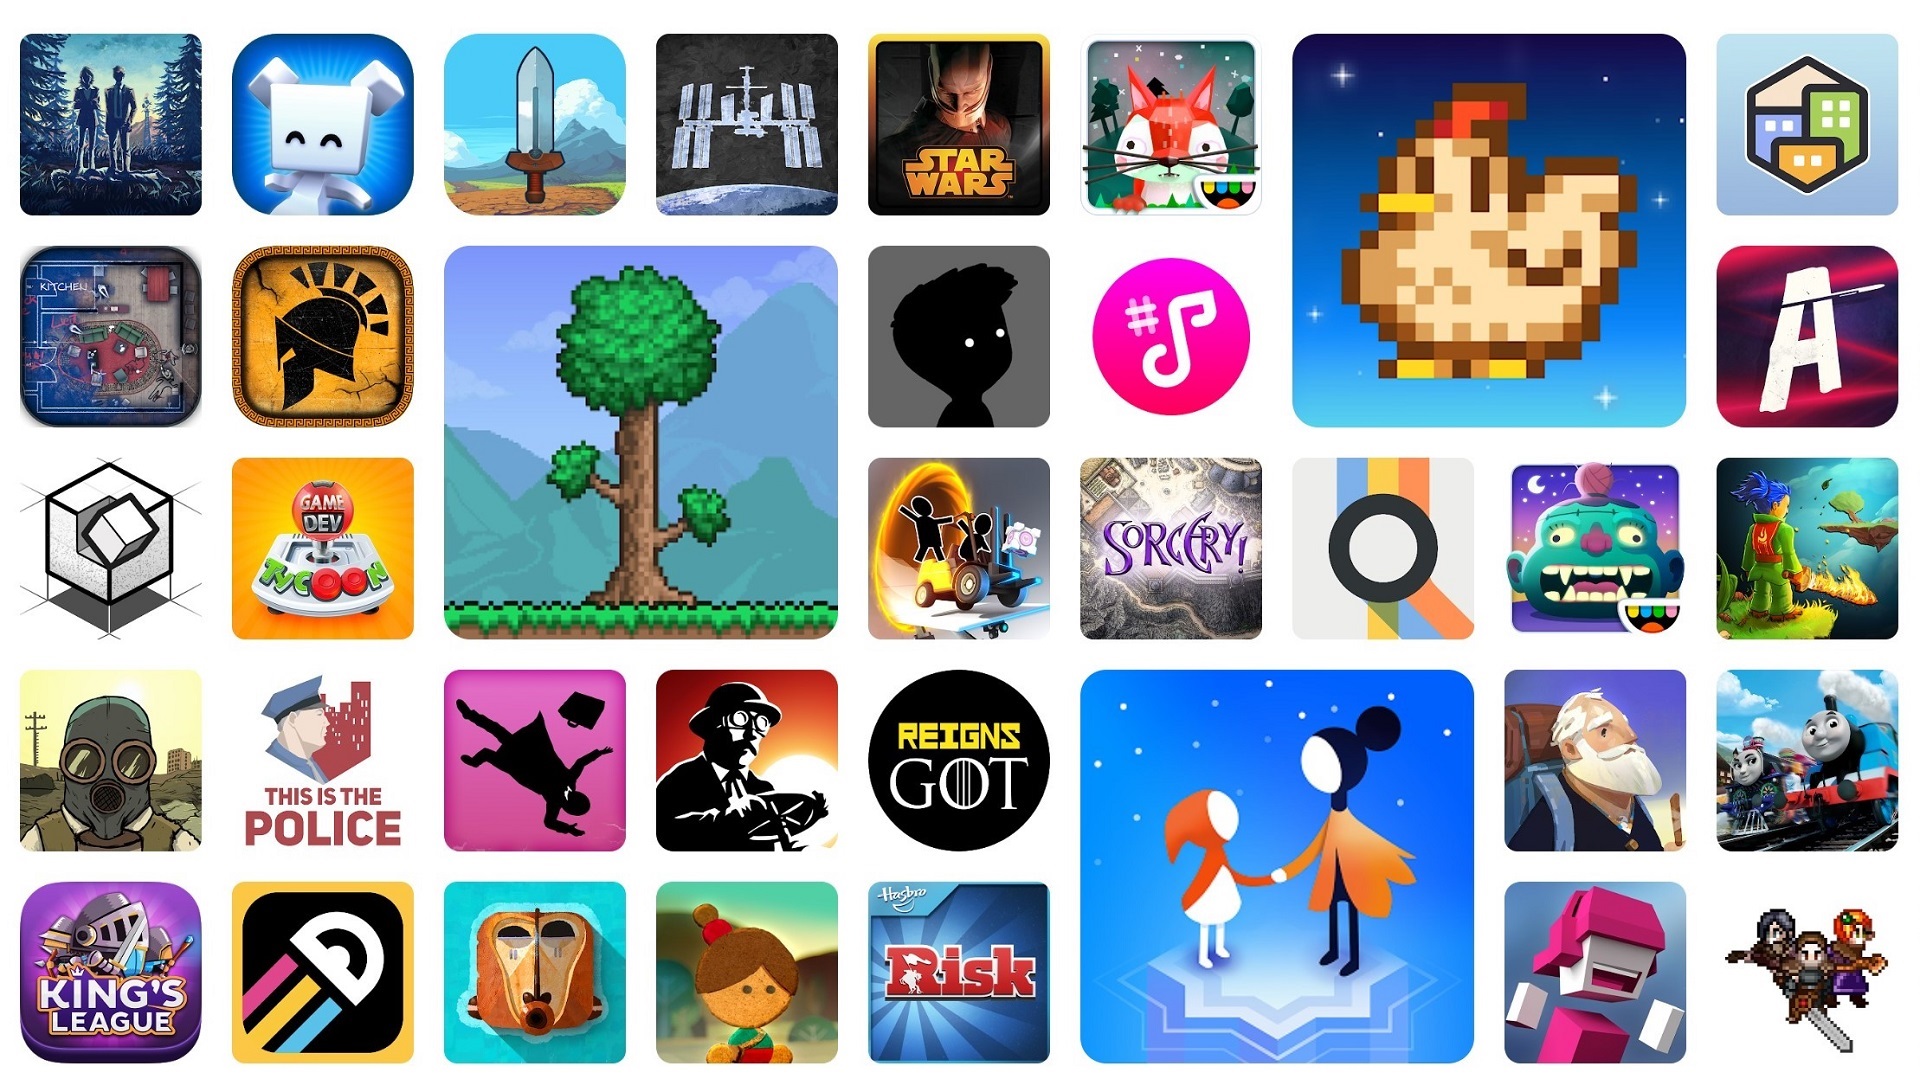 Google Play Pass The Full List Of Included Game And App Titles